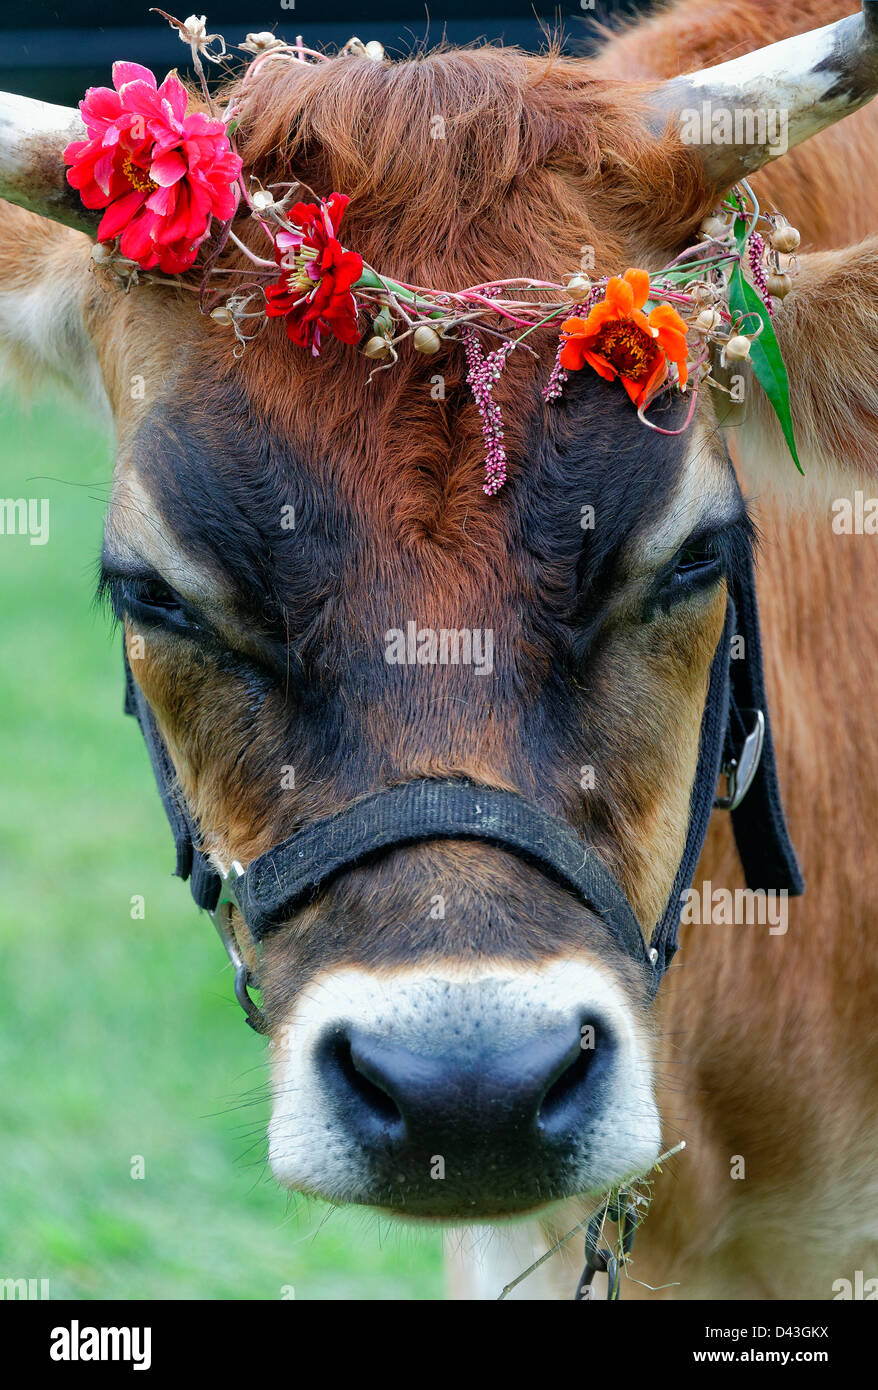 Steer with flower wreath. Stock Photo